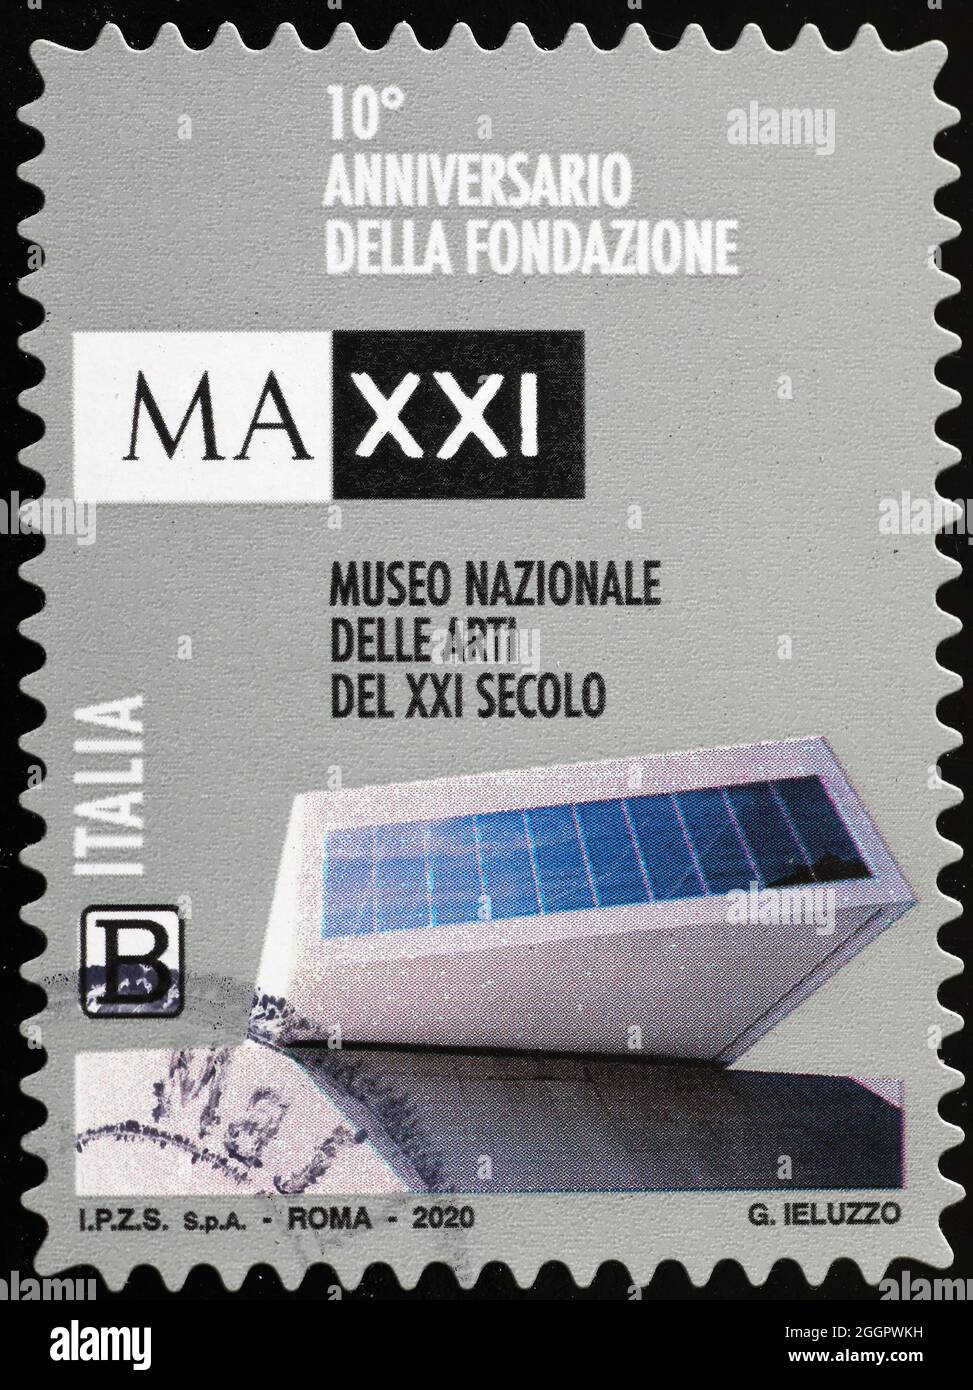 MAXXI, national museum of 21st-century arts of Rome, on stamp Stock Photo